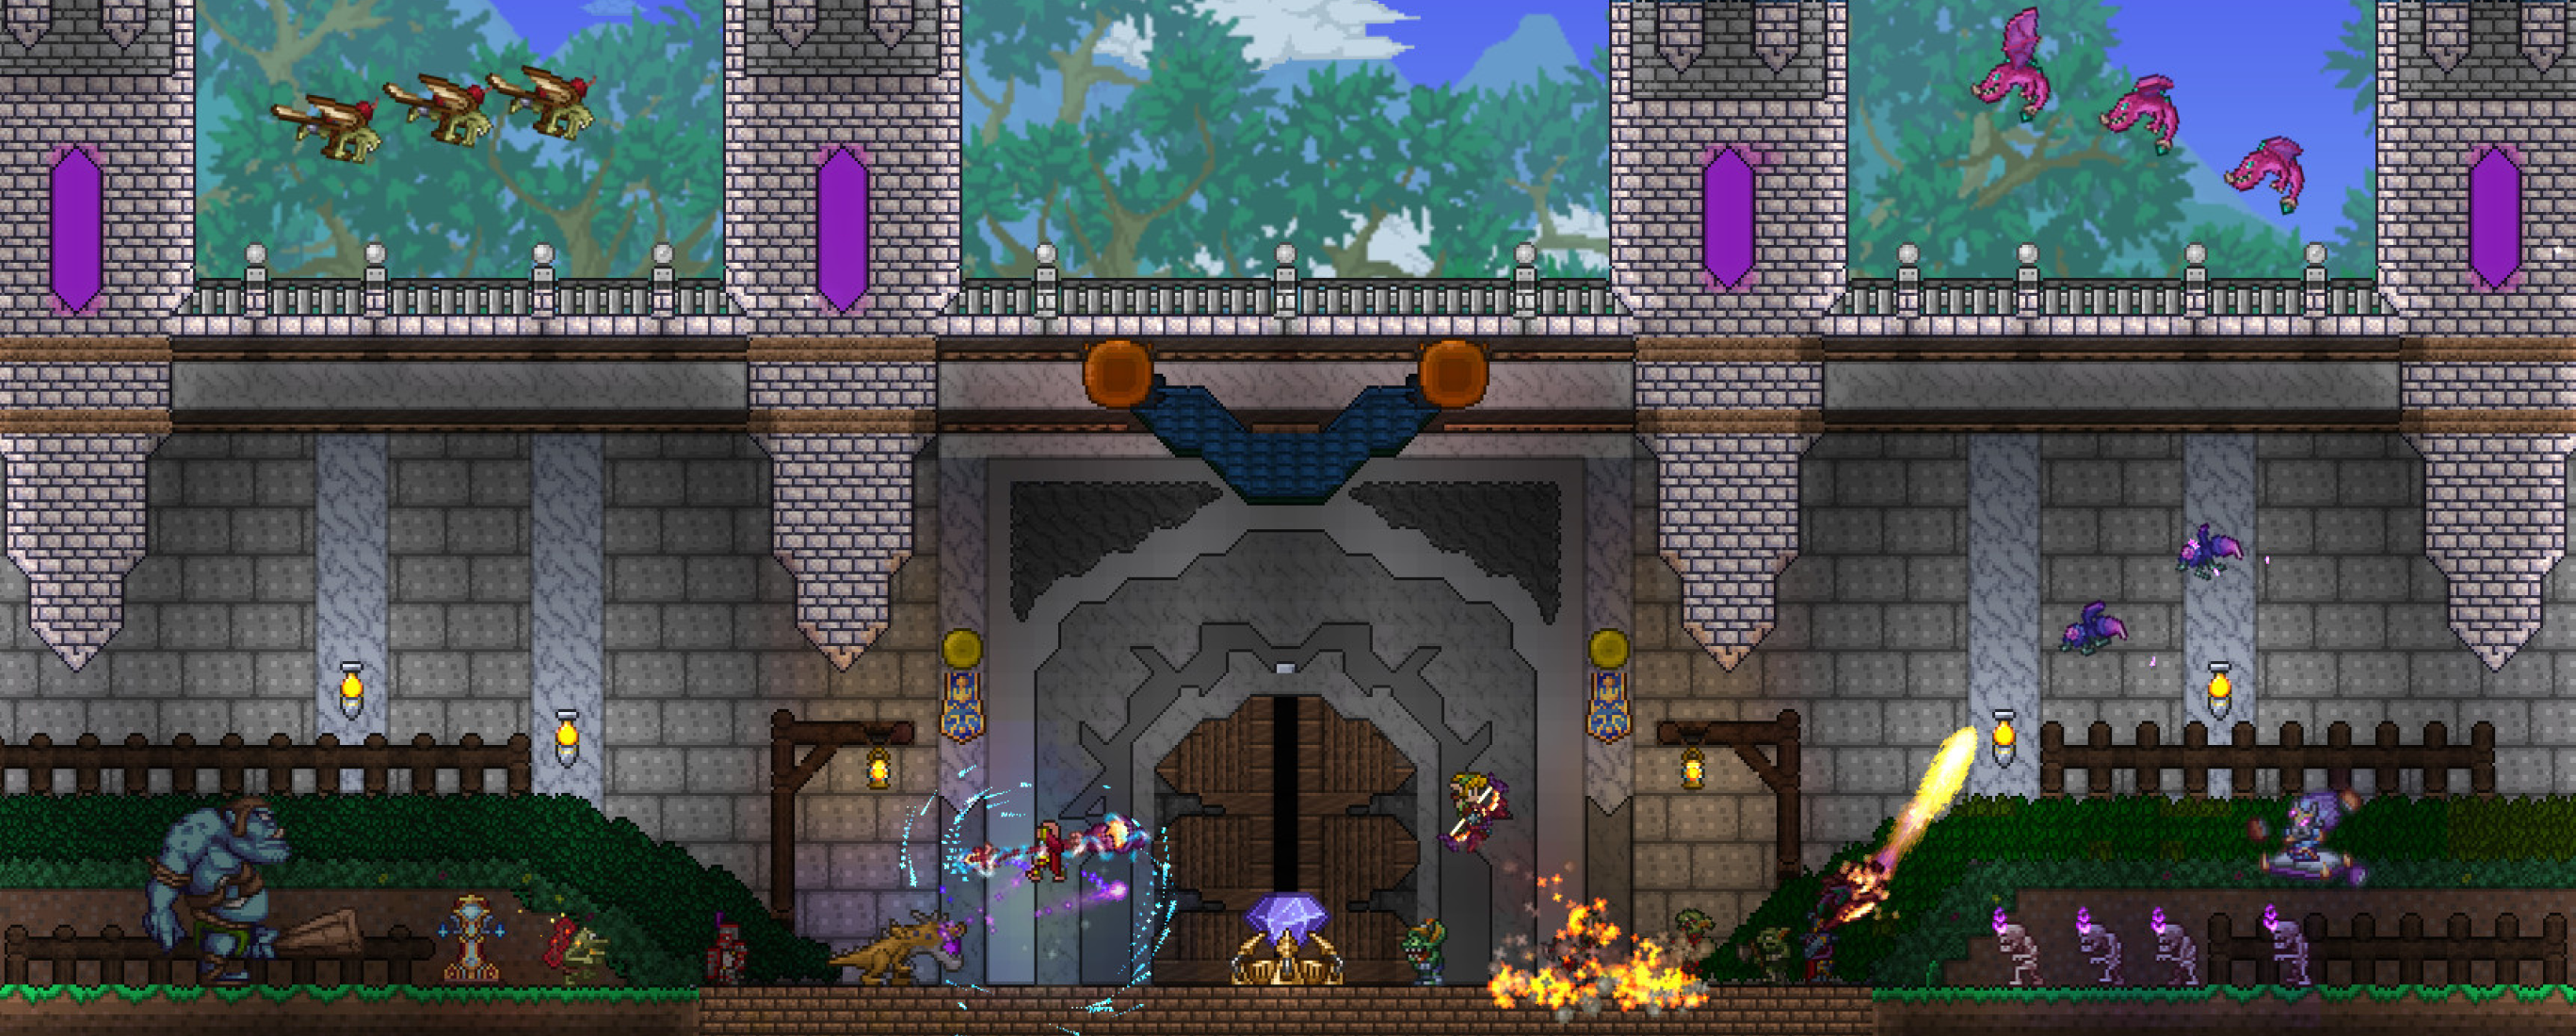 Terraria hero fighting by a castle